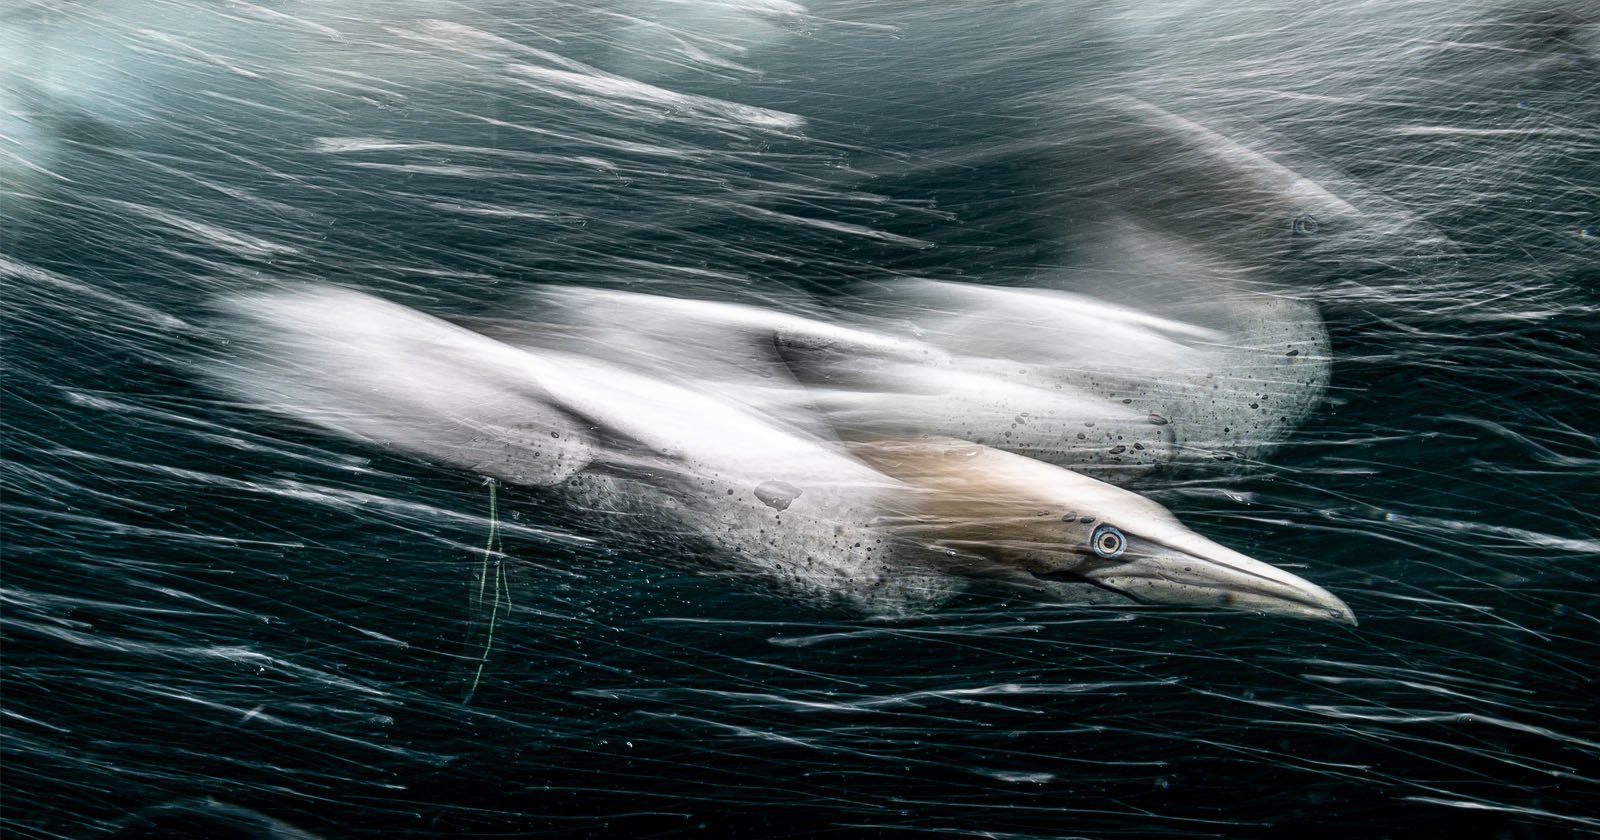 Photo of Diving Gannet Wins $120,000, the World’s Largest Cash Prize